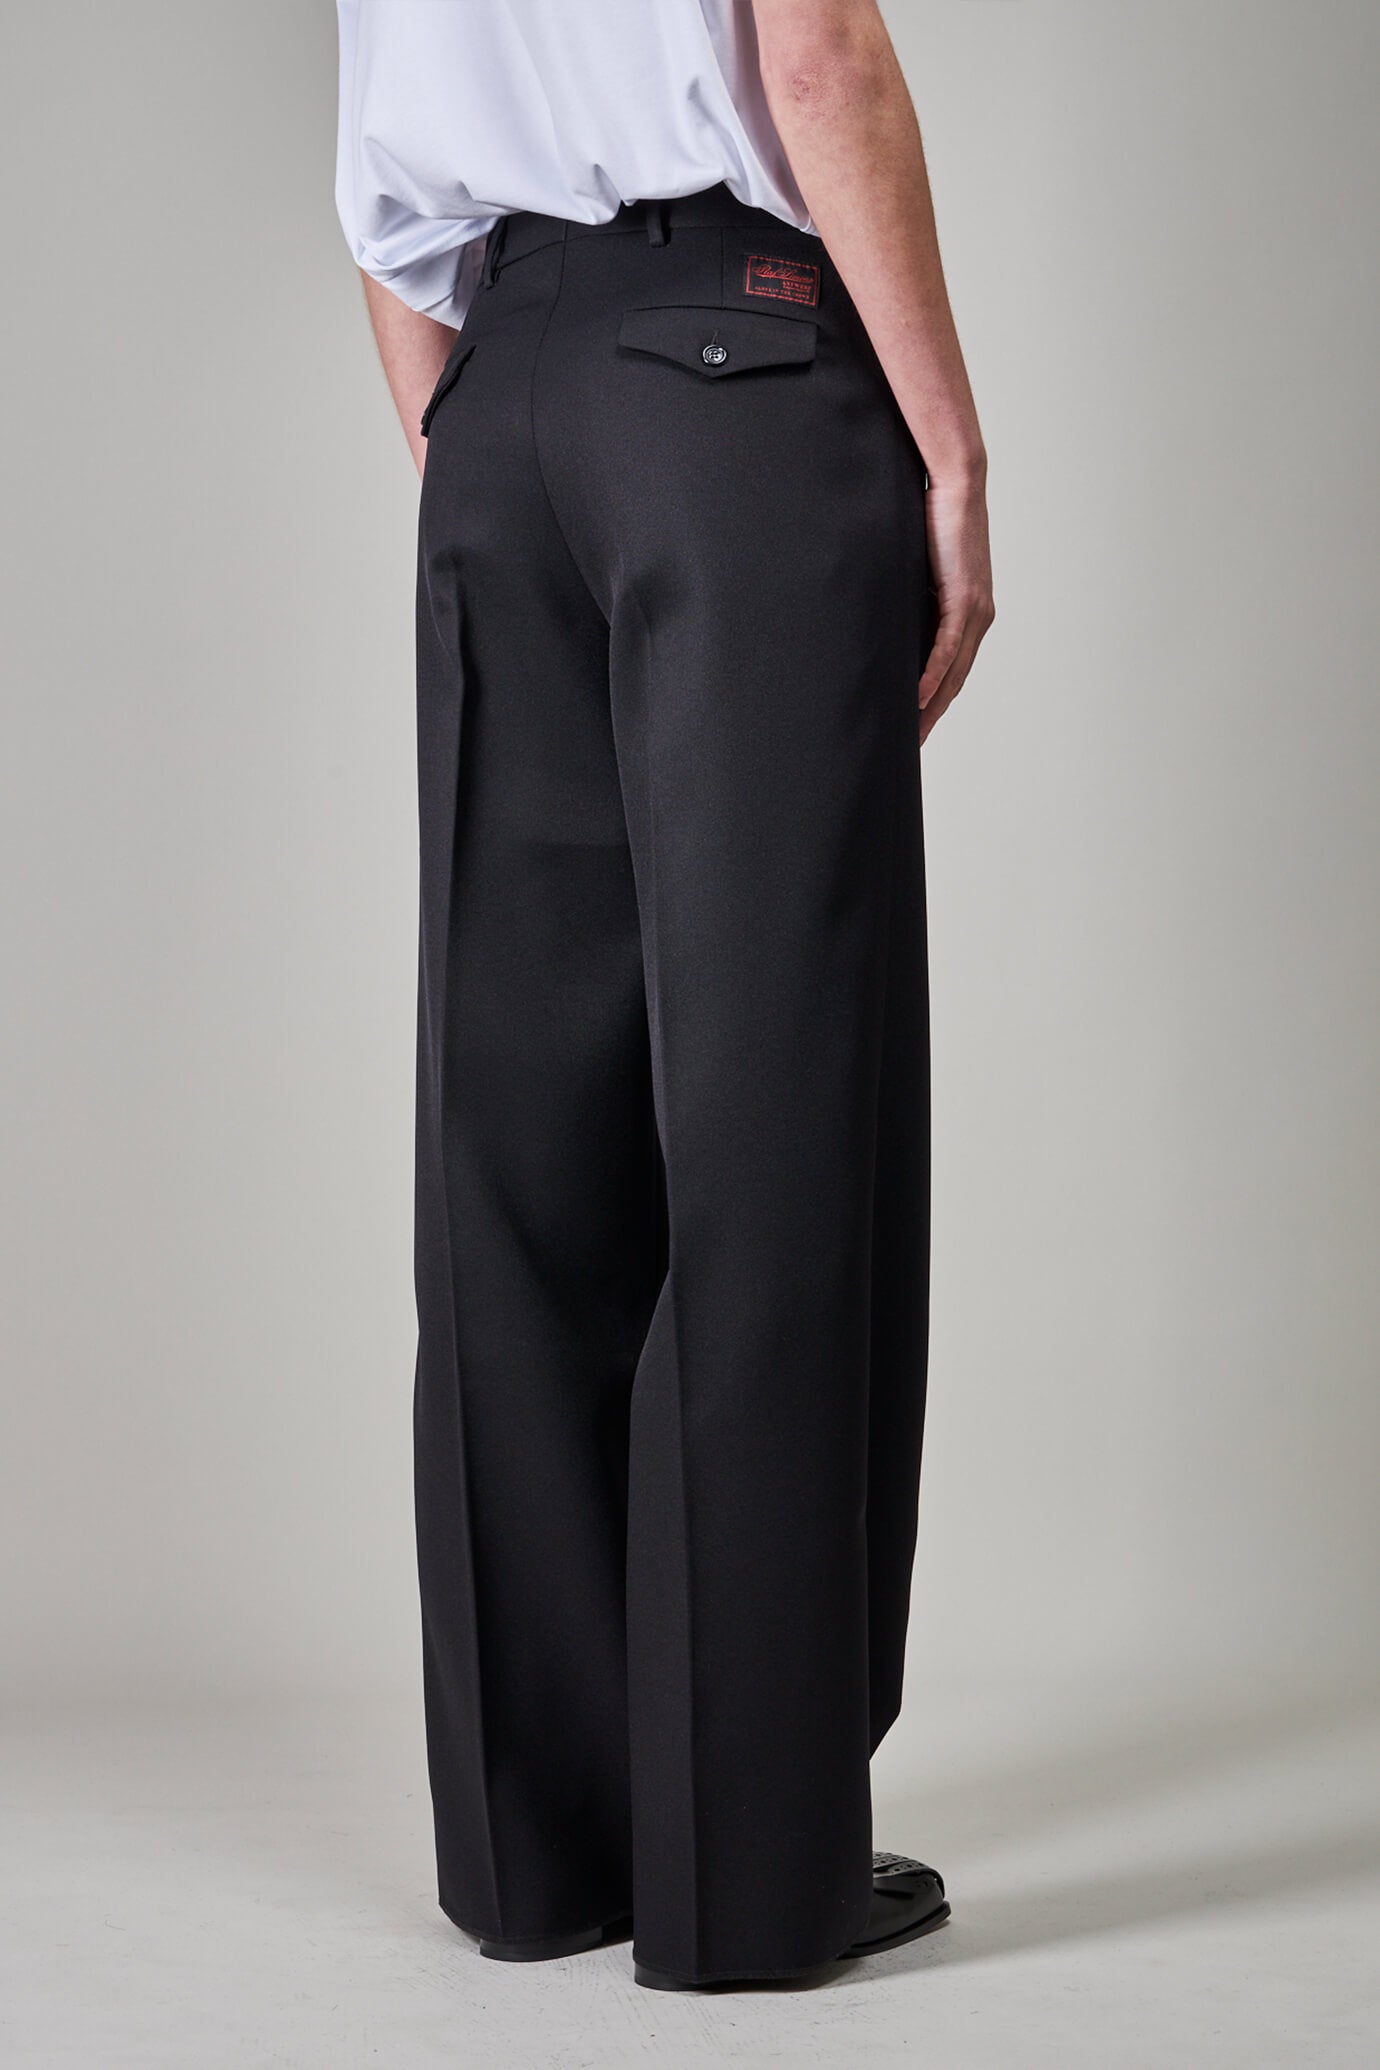 Classic Wide Leg Pants with 2 Back Pockets, black